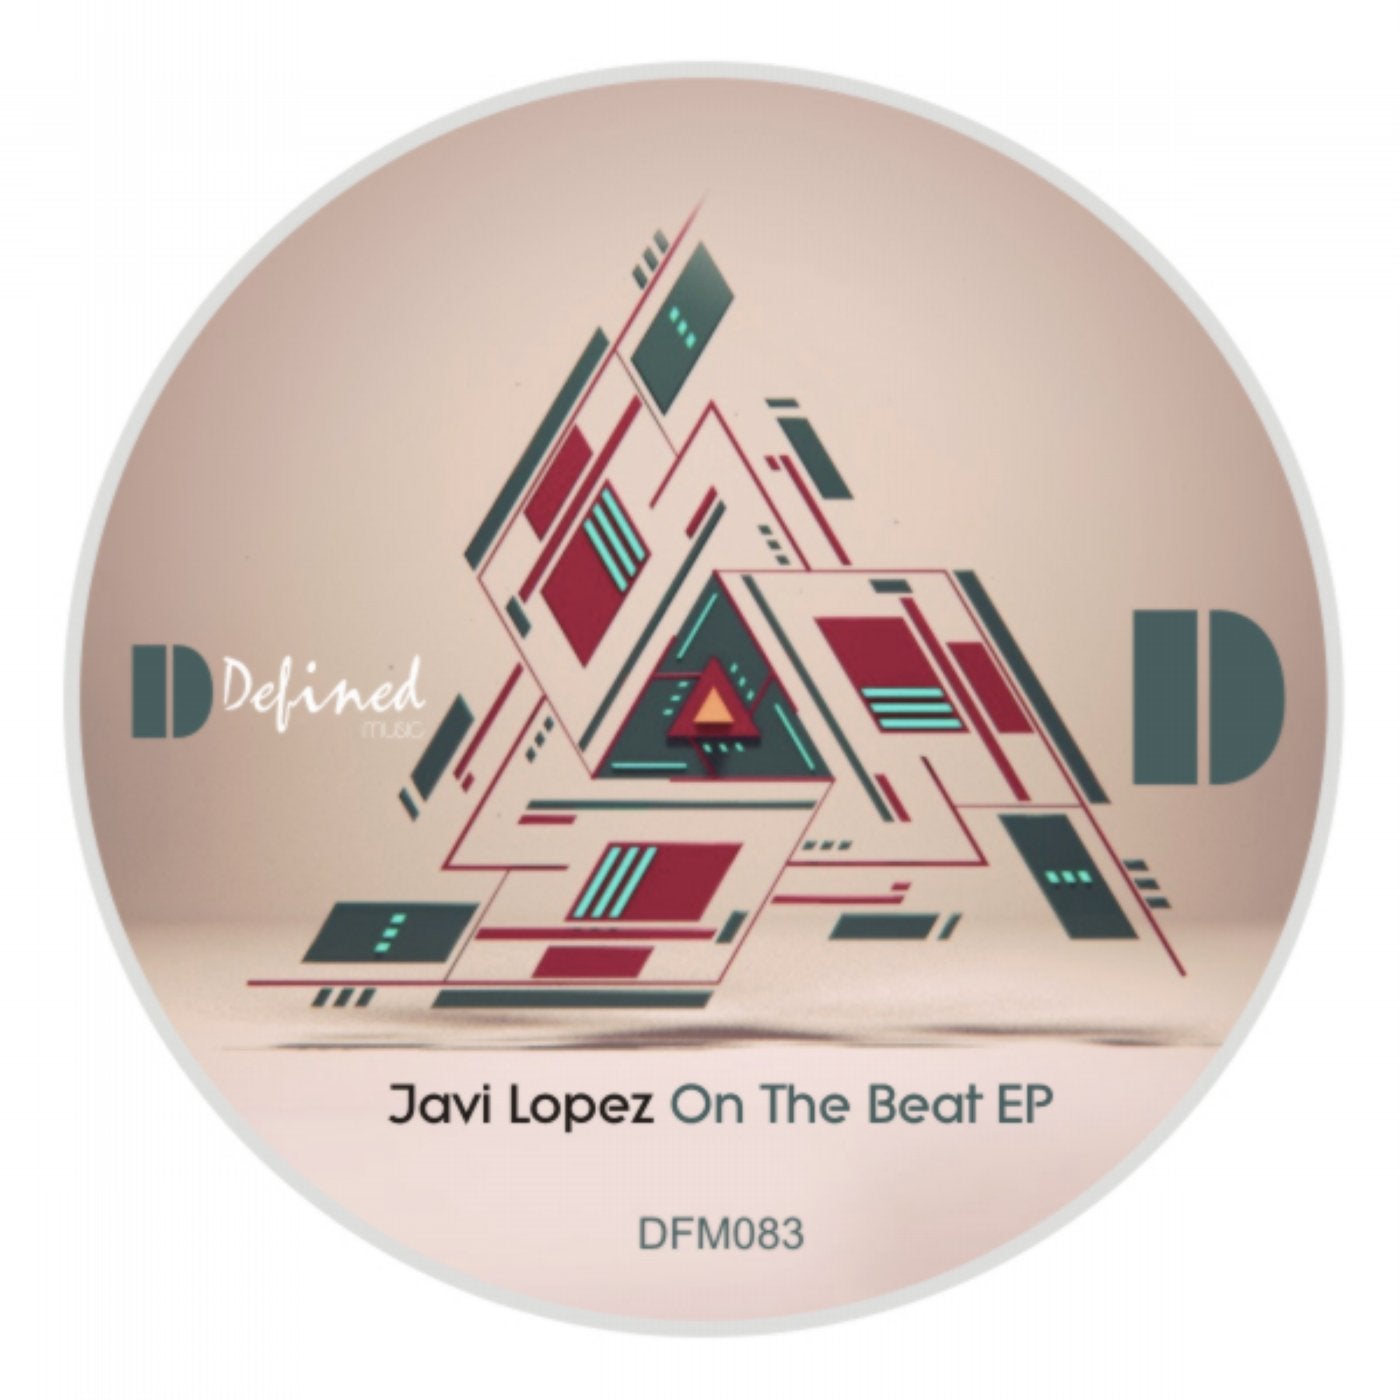 On The Beat EP